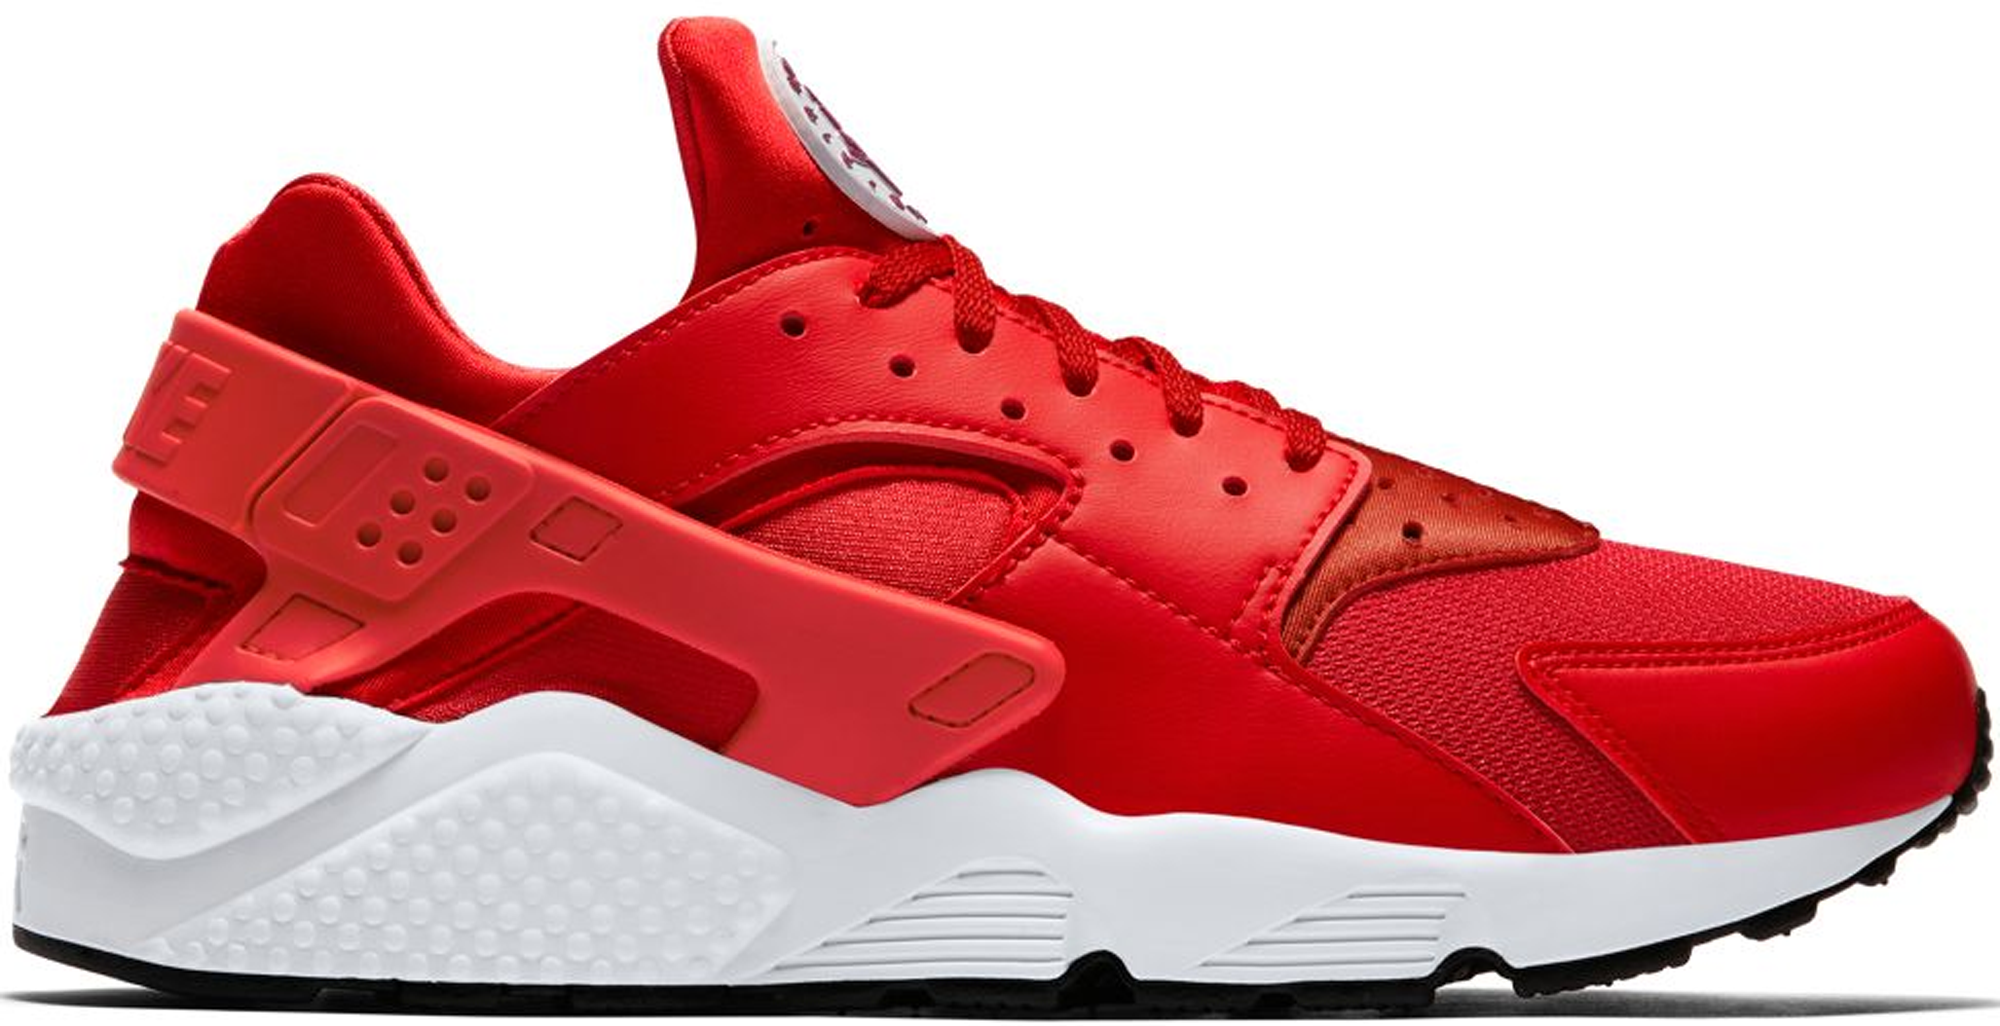 red huaraches size 4